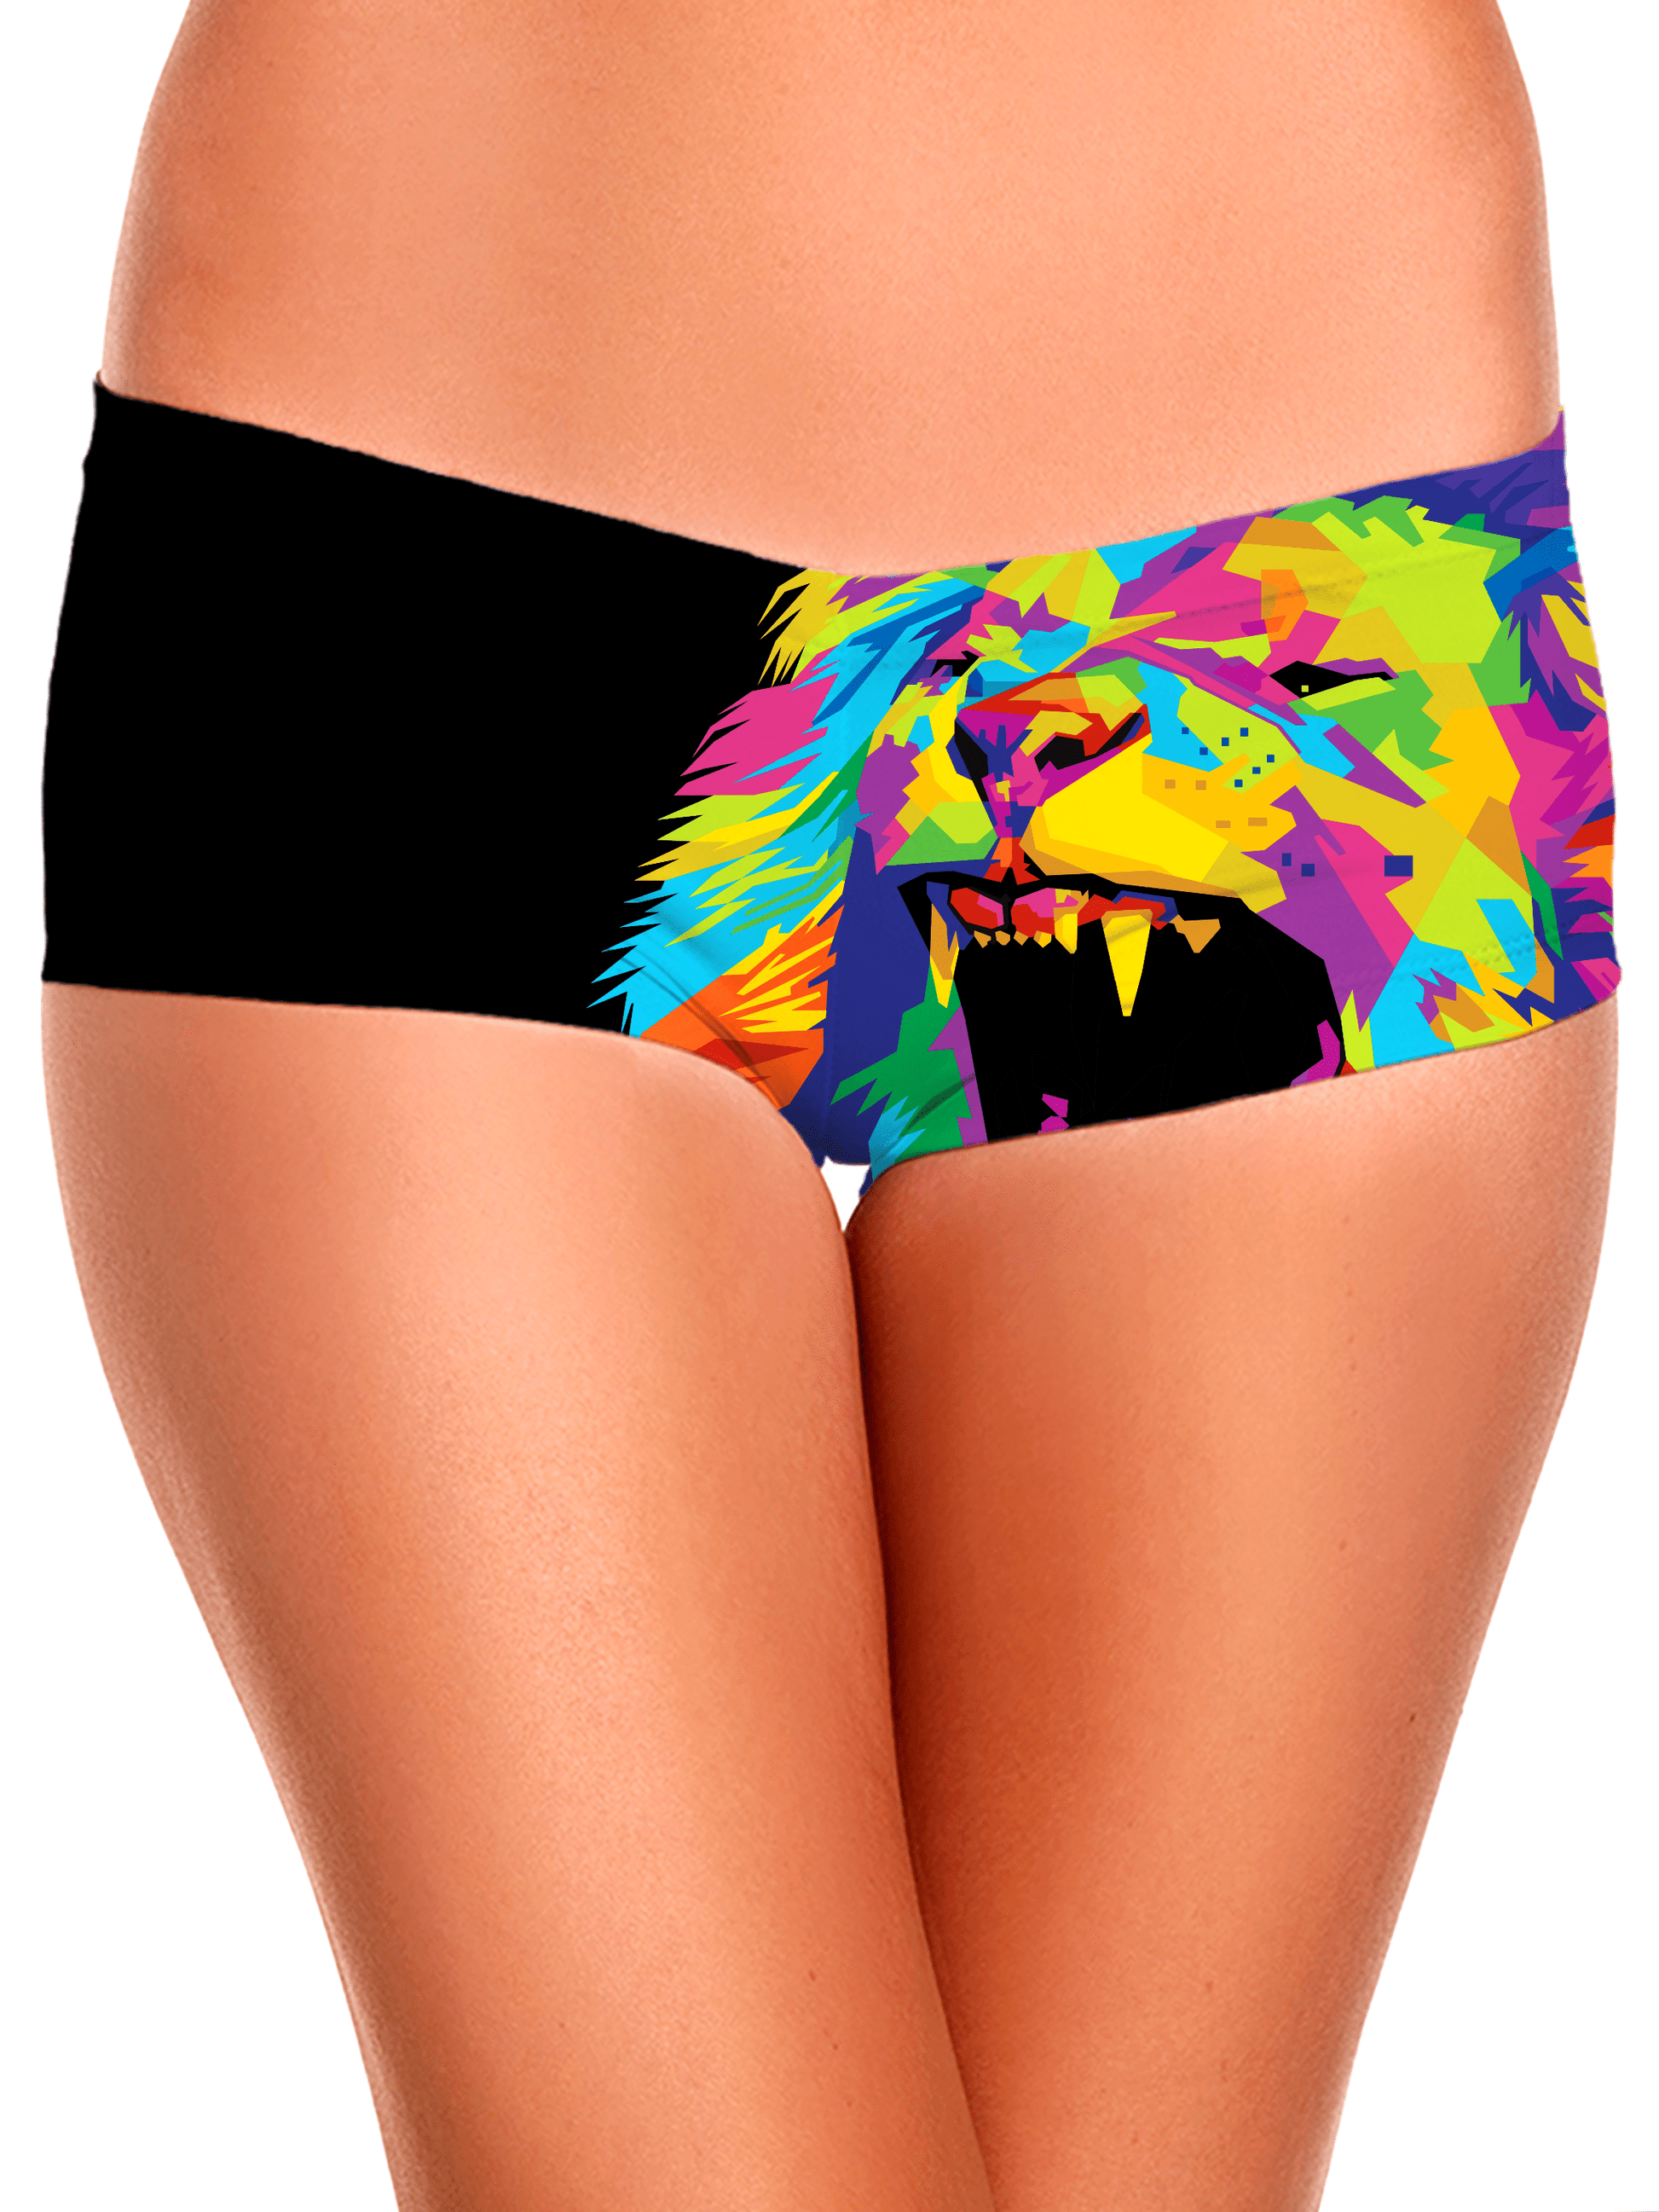 Psychedelic Lion Booty Shorts, Noctum X Truth, | iEDM